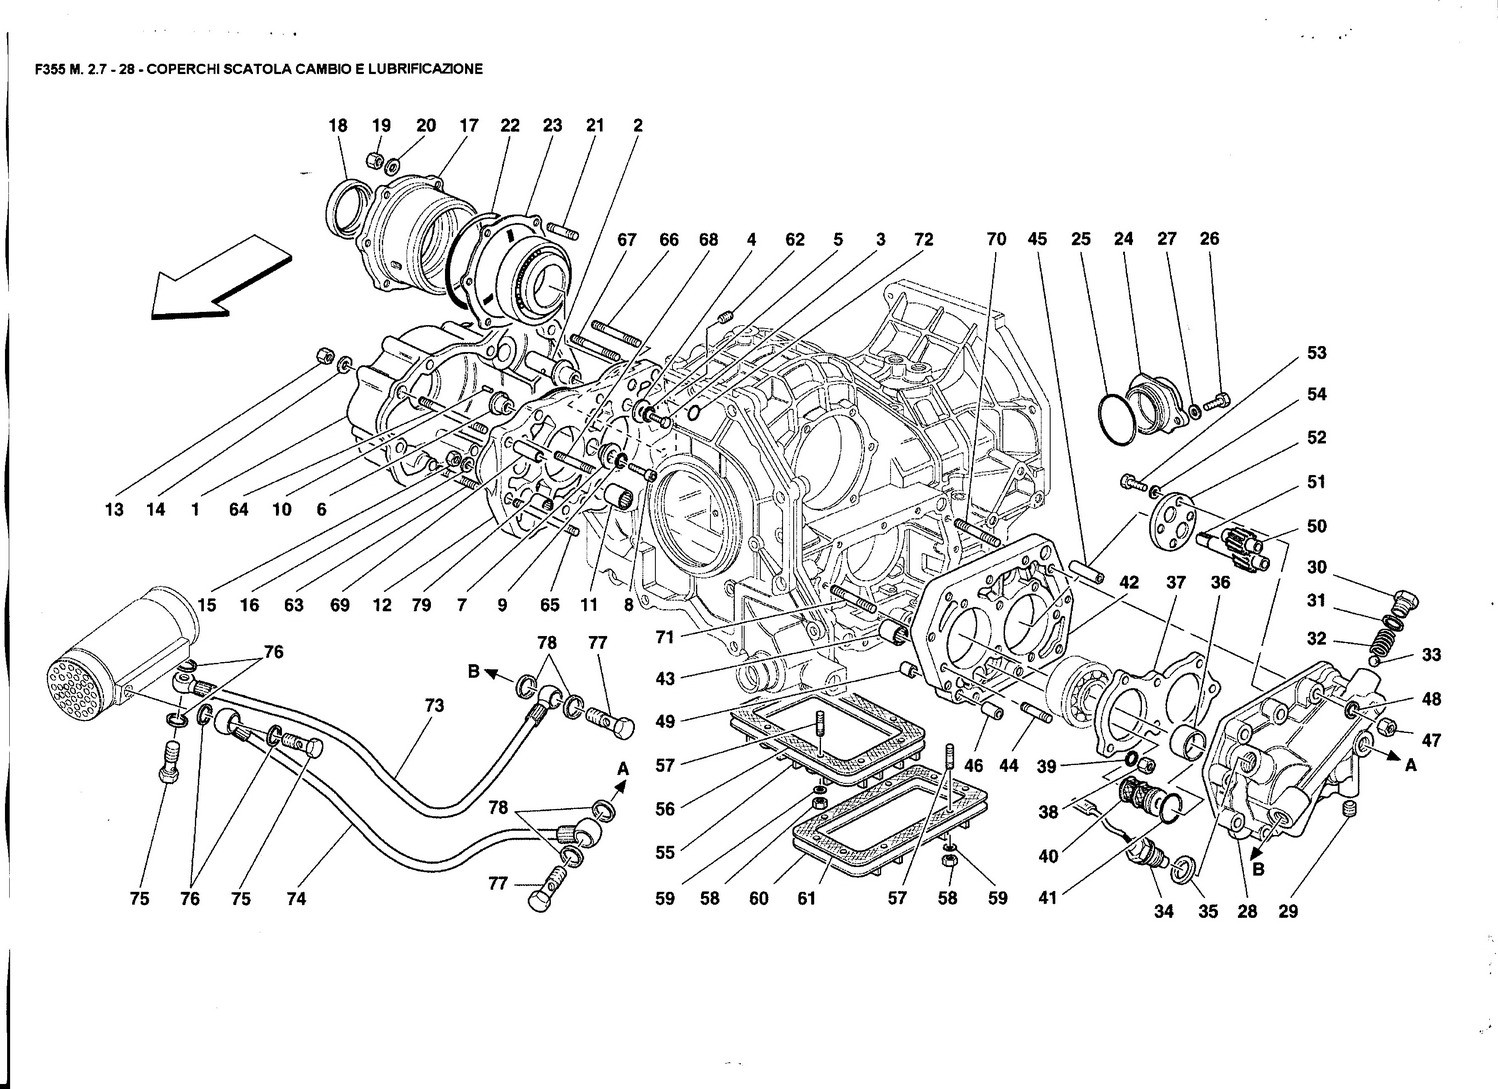 GEARBOX COVERS ANO LUBRICATION